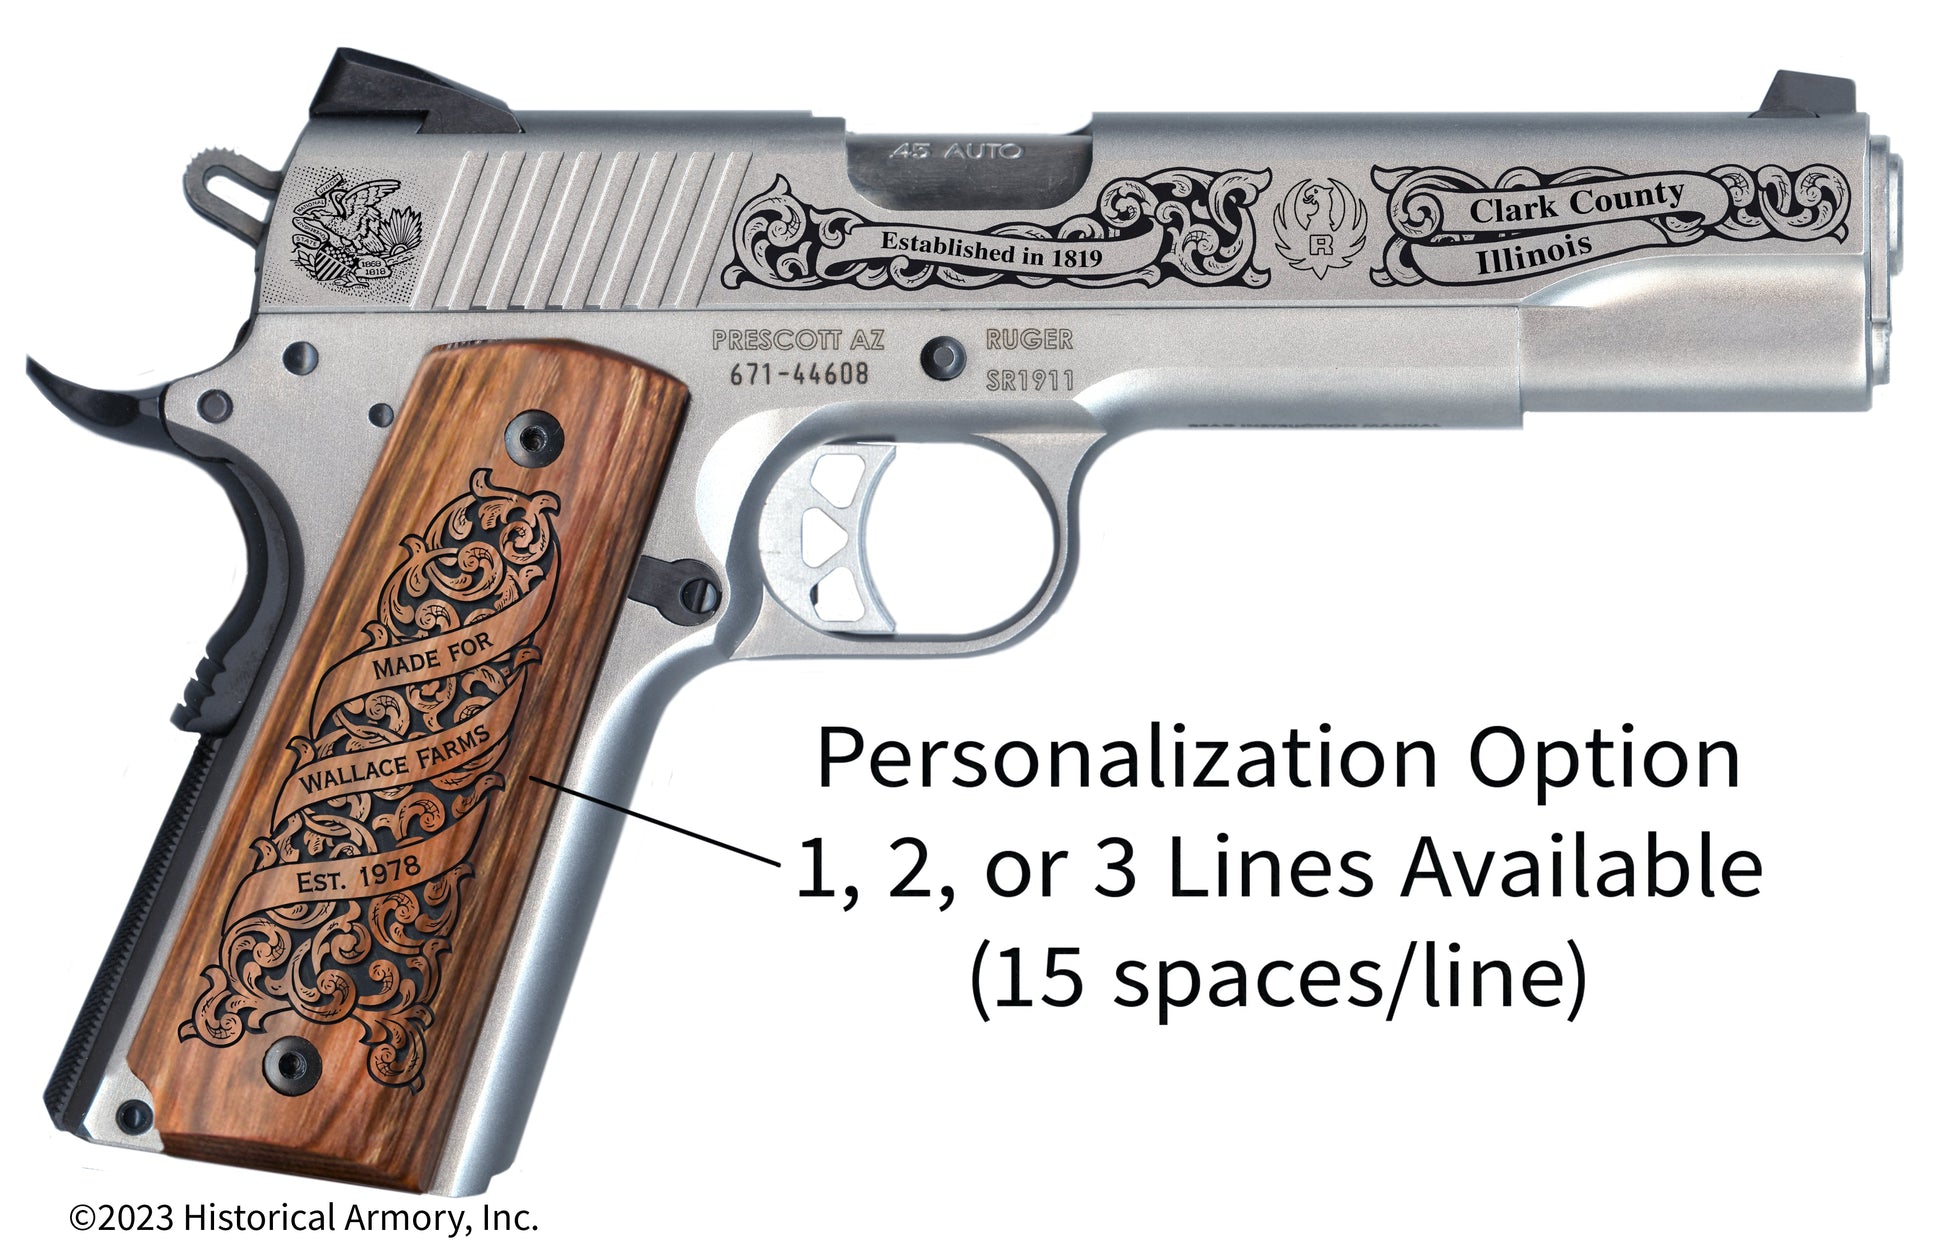 Clark County Illinois Personalized Engraved .45 Auto Ruger 1911